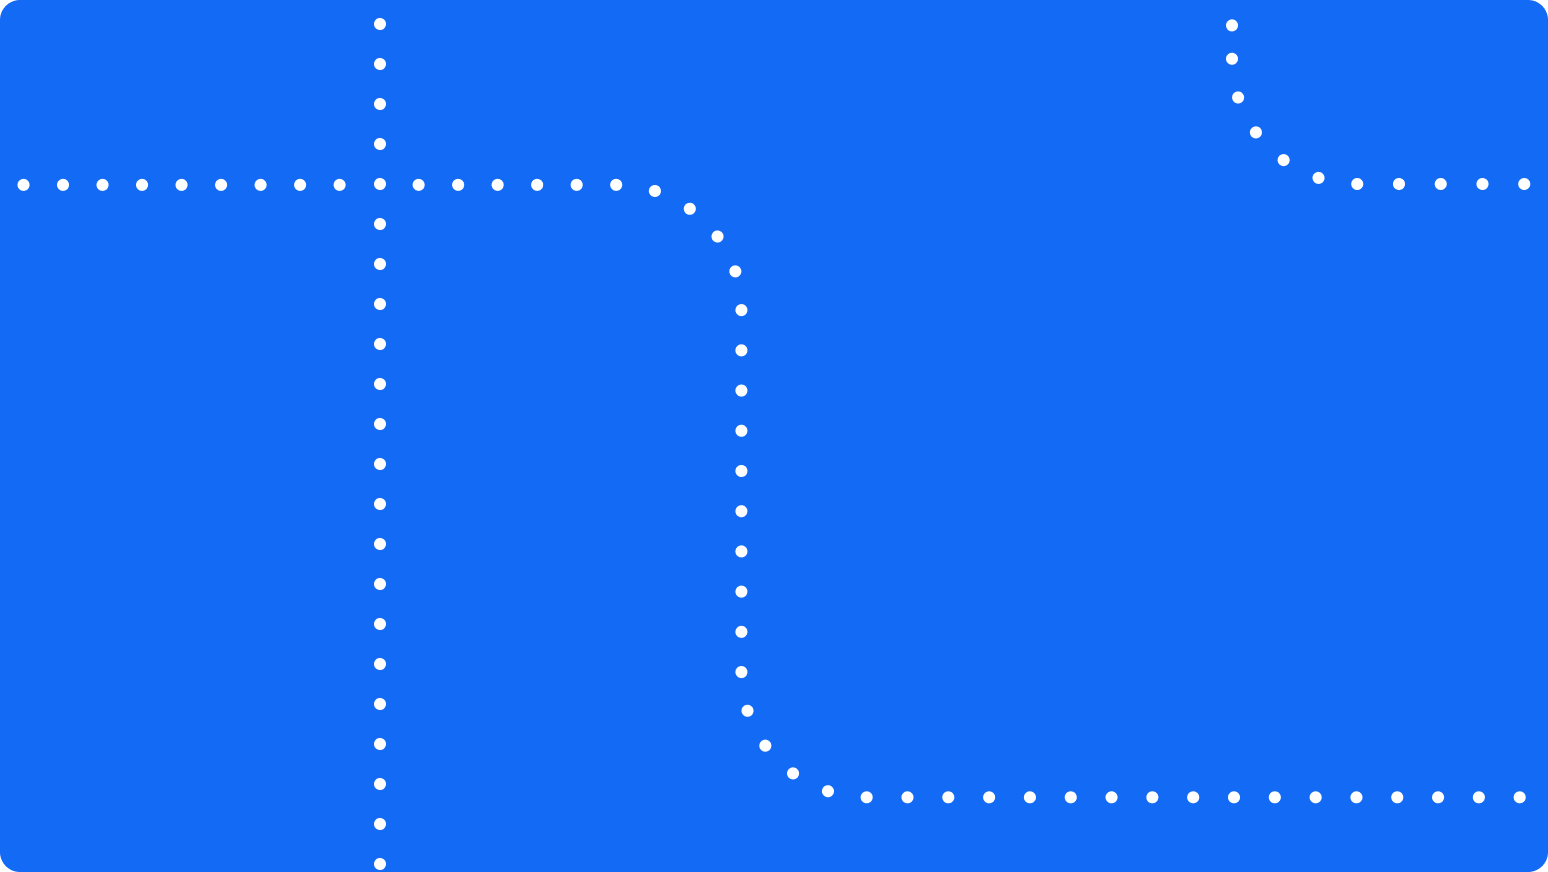 A blue rectangle with white dotted lines running through it